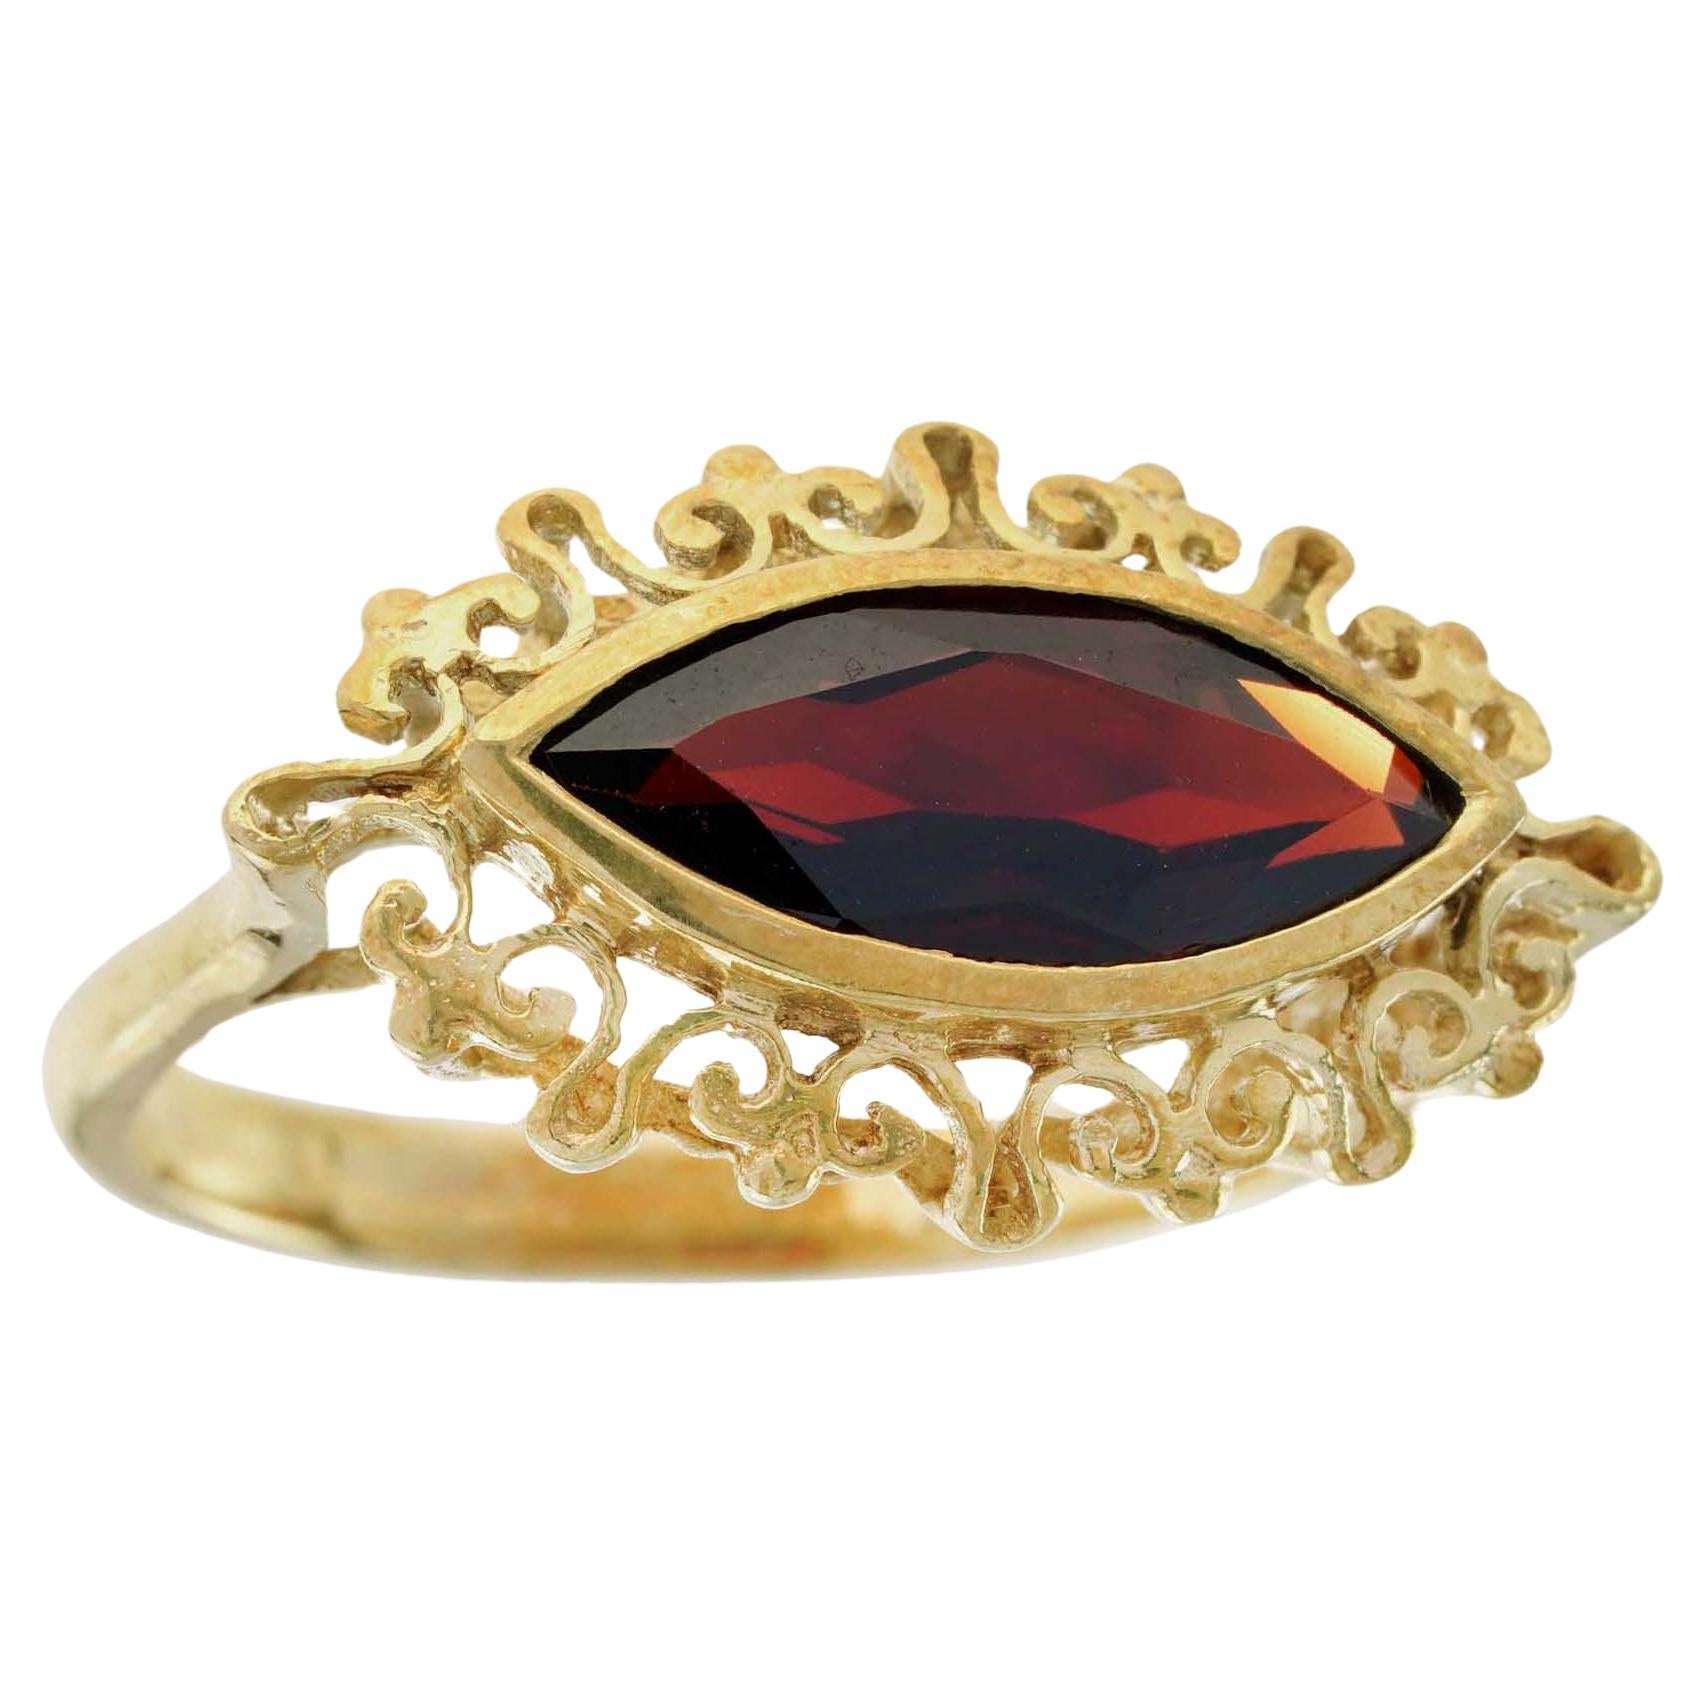 For Sale:  Natural Marquise Garnet Vintage Style Eye Ring in Solid 9K Yellow Gold